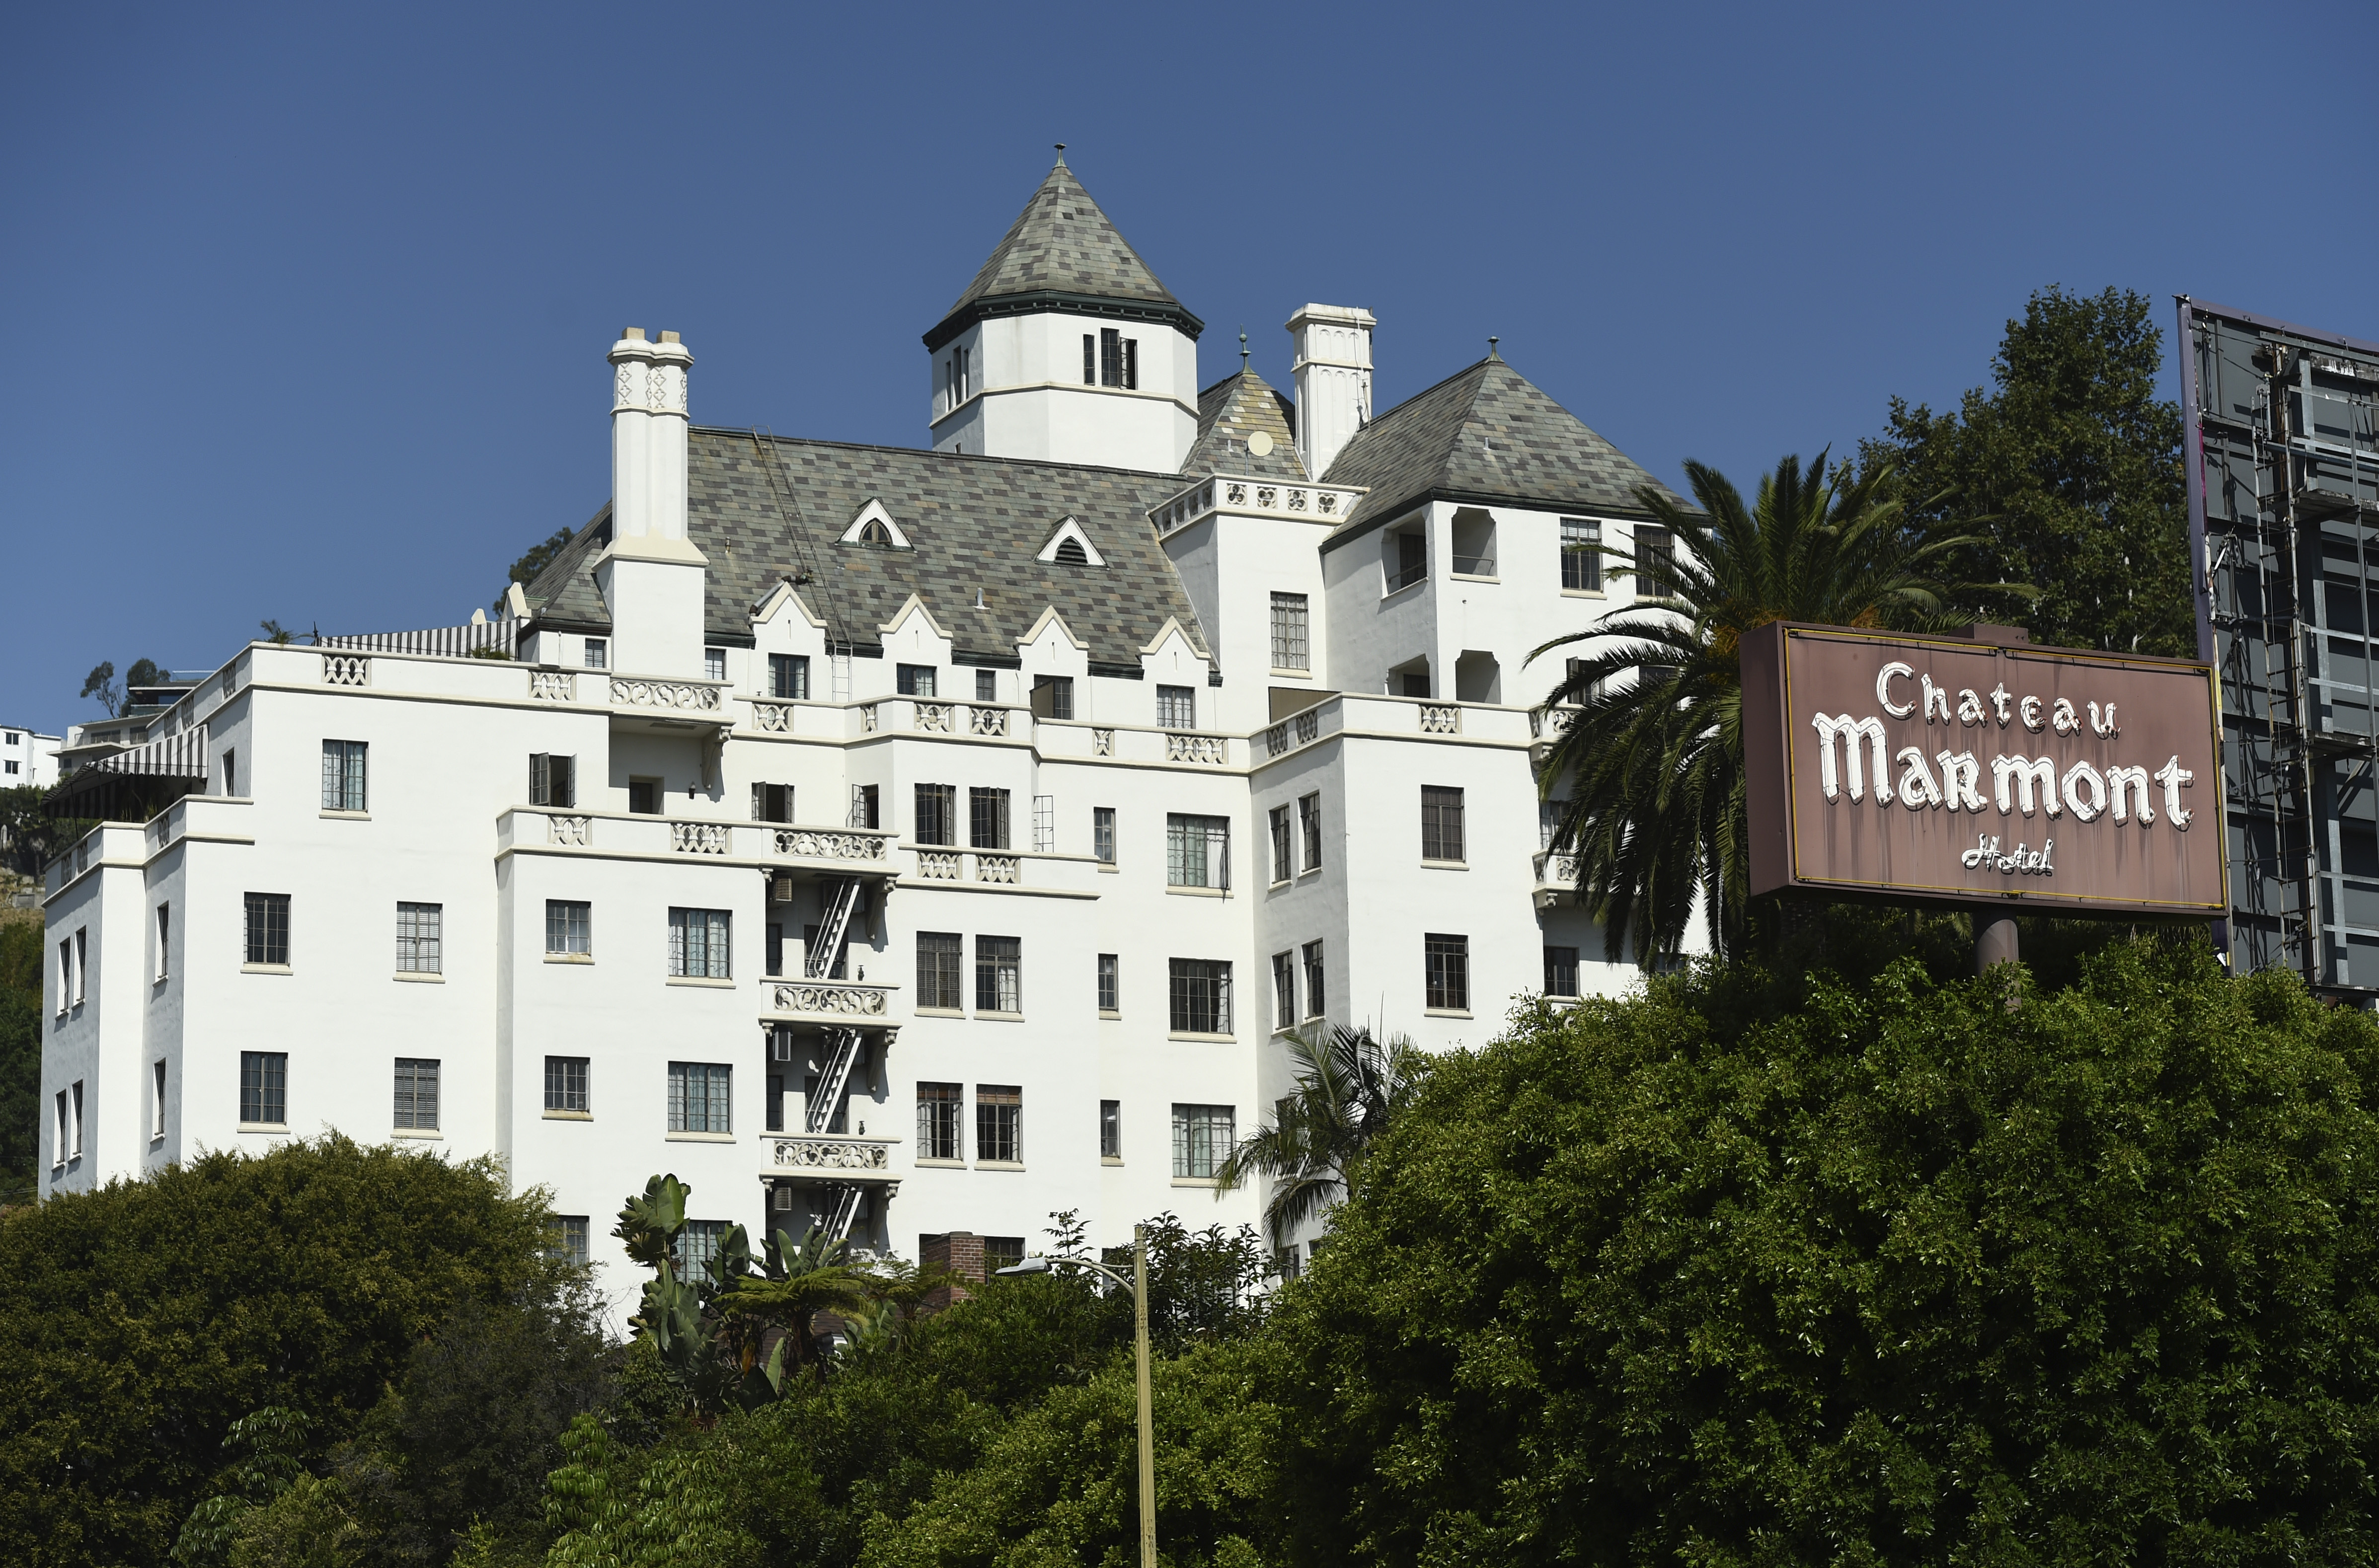 The Chateau Marmont Hotel in July 2020.